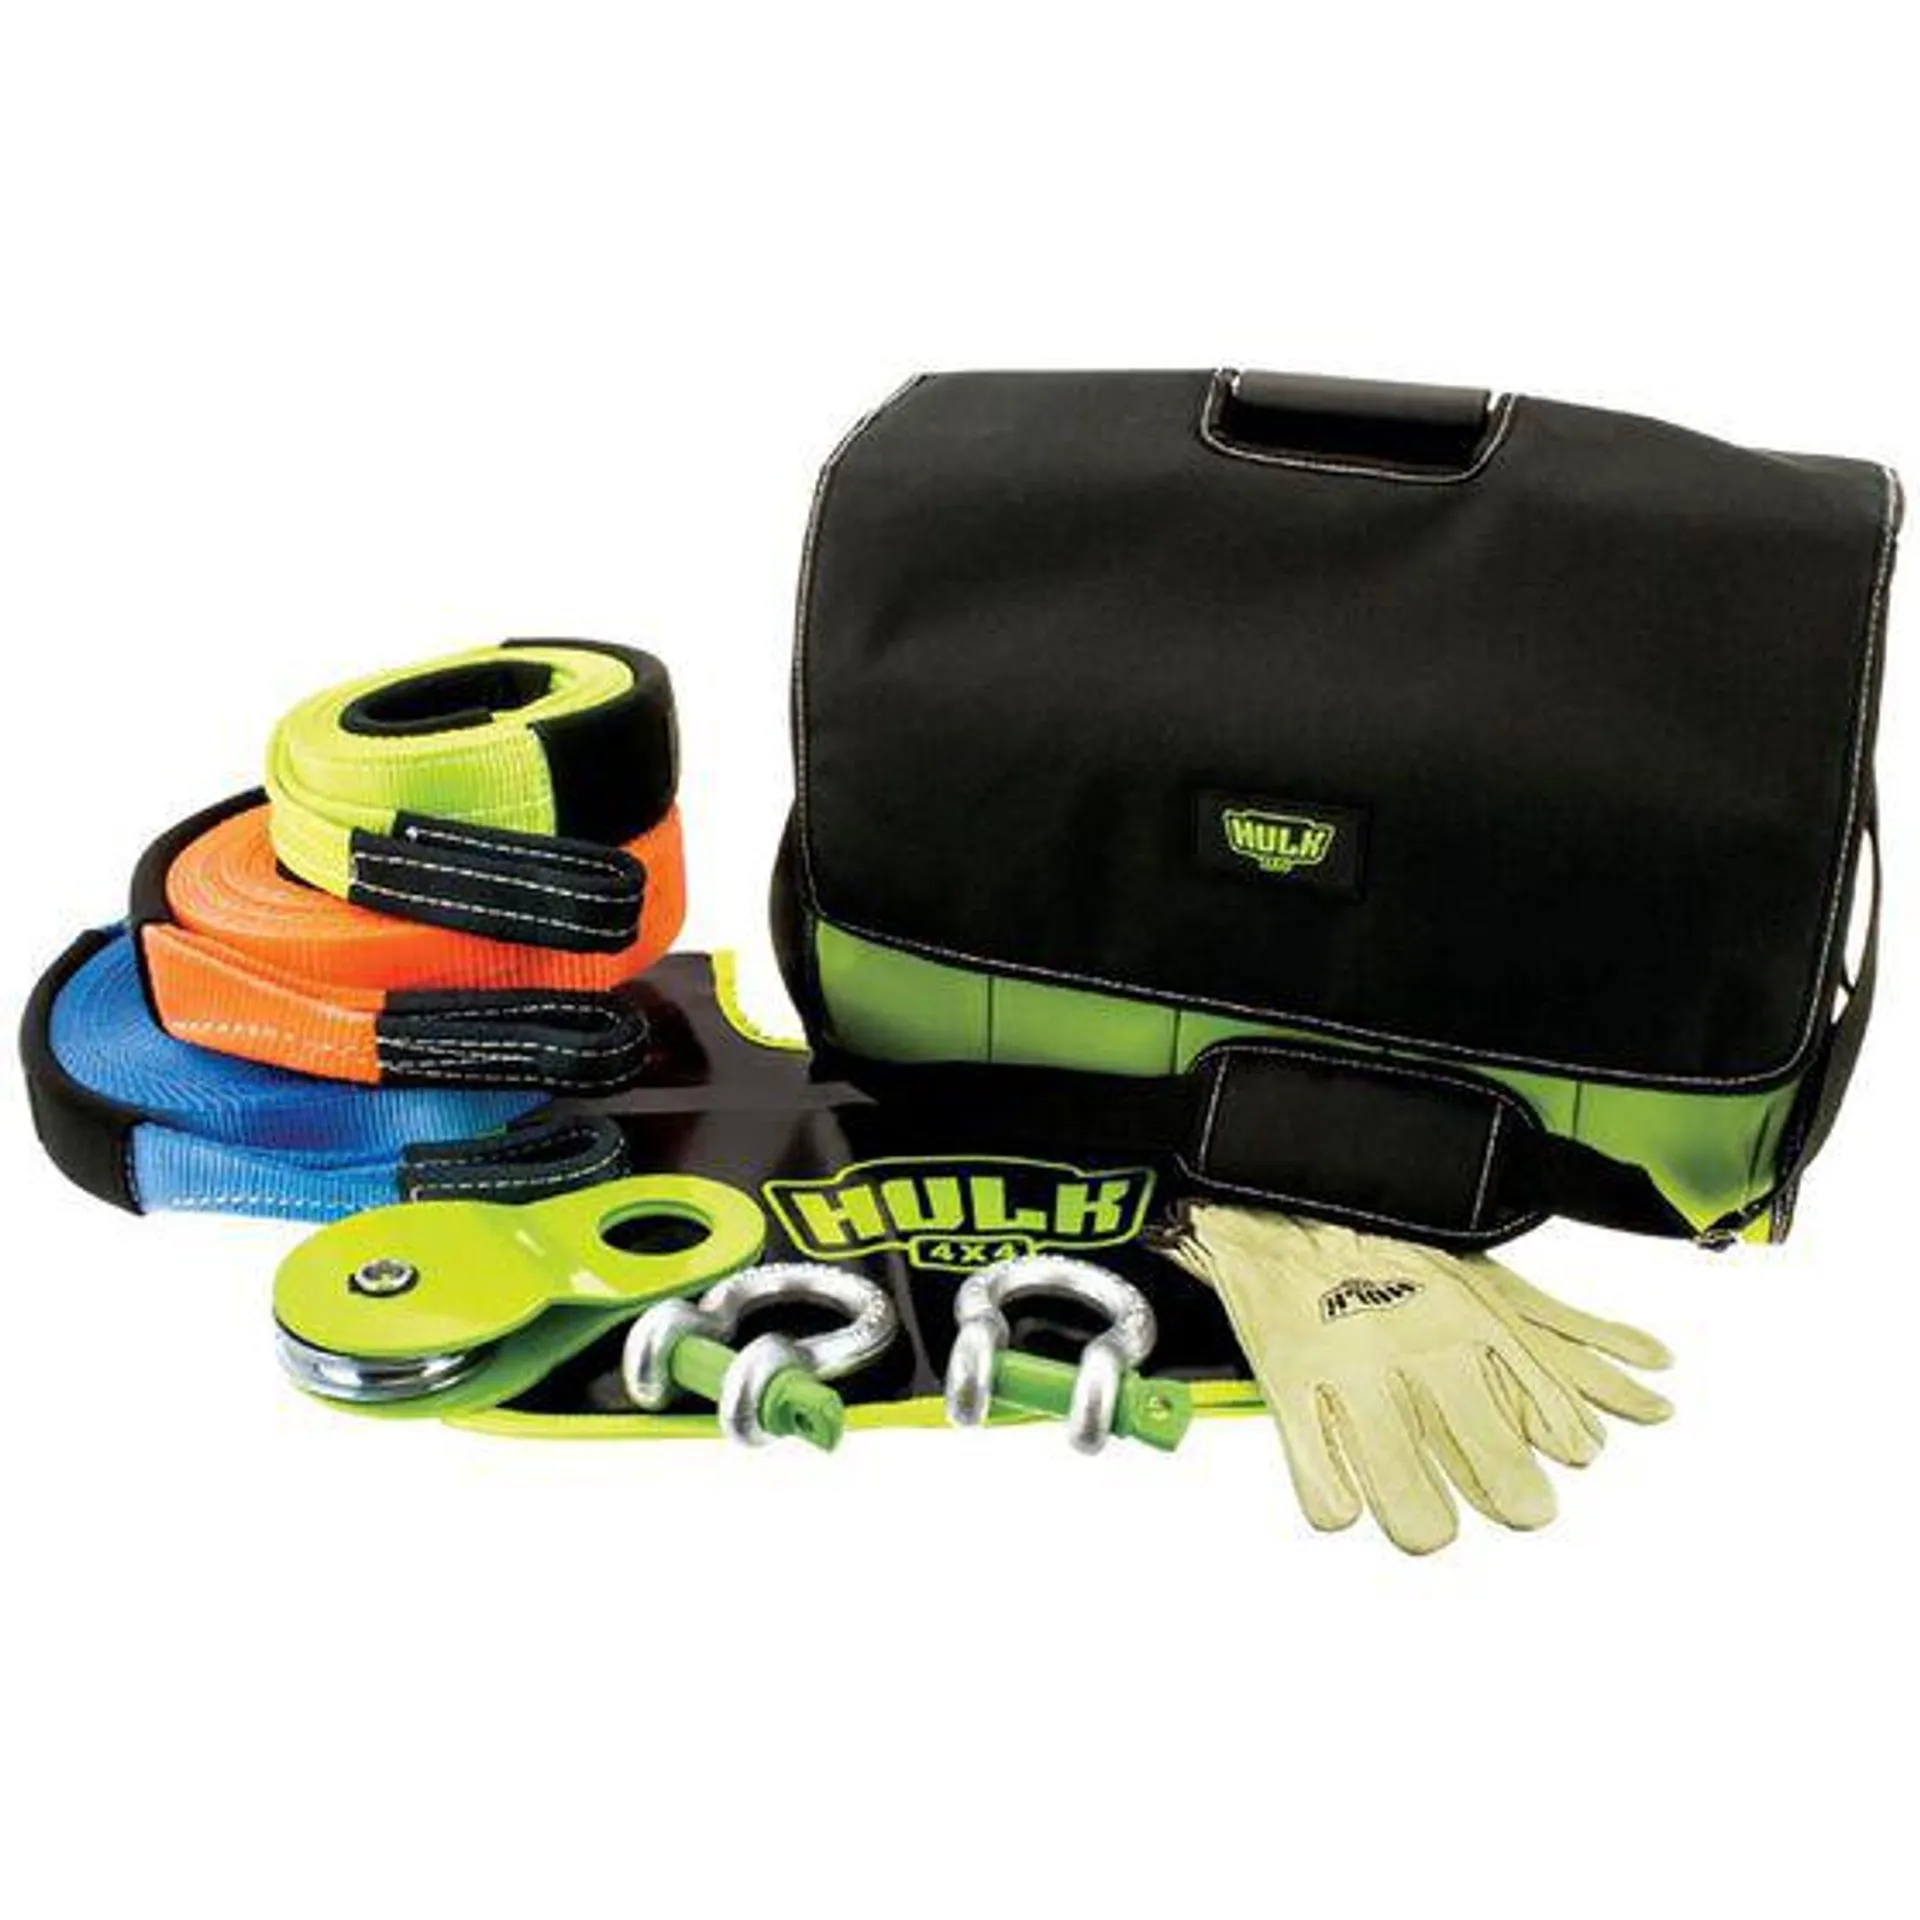 Hulk 4x4 Large Recovery Kit Assorted Products With Bag - HU200K